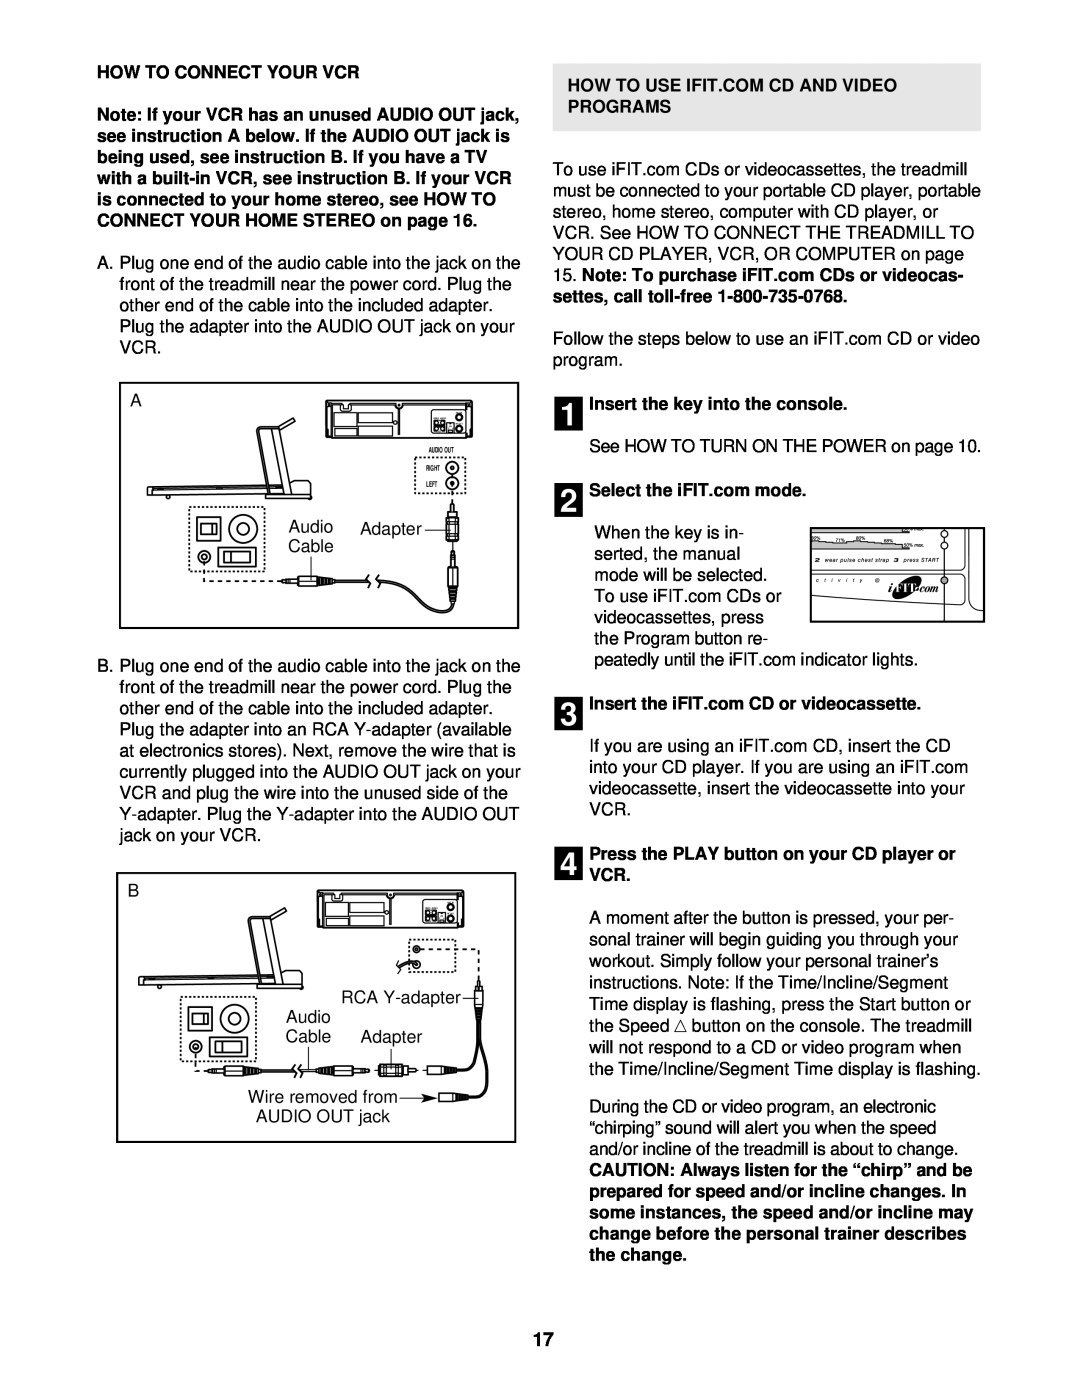 ProForm PFTL69211 user manual How To Connect Your Vcr, How To Use Ifit.Com Cd And Video Programs, Audio, Adapter, Cable 